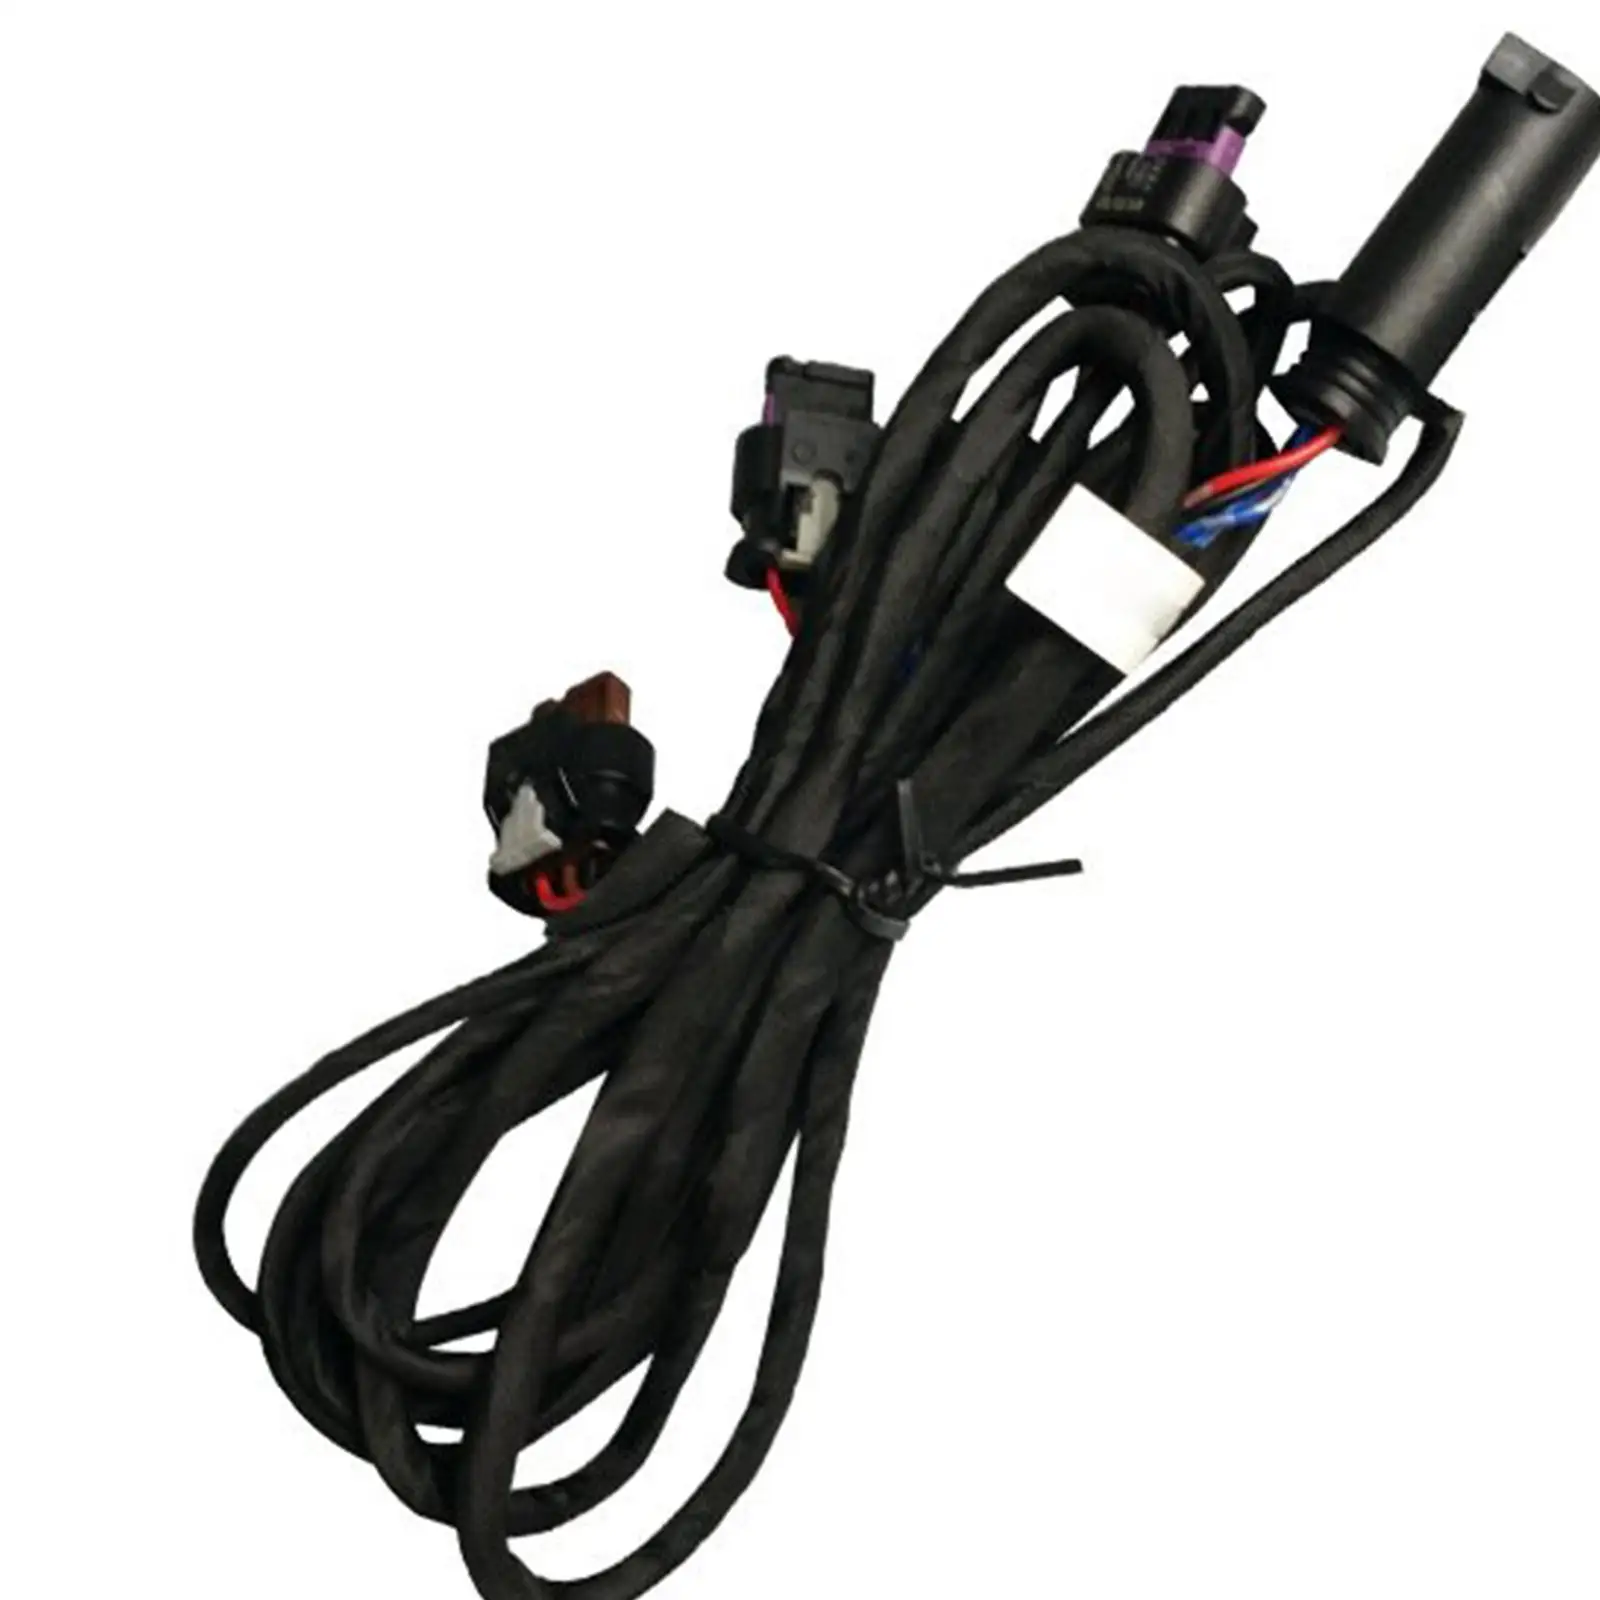 Parking Cables Car Accessories, Front Rear Wiring Harness Replaces for 3 Series 4 Series F32 Lci F30 ,Sturdy, Premium